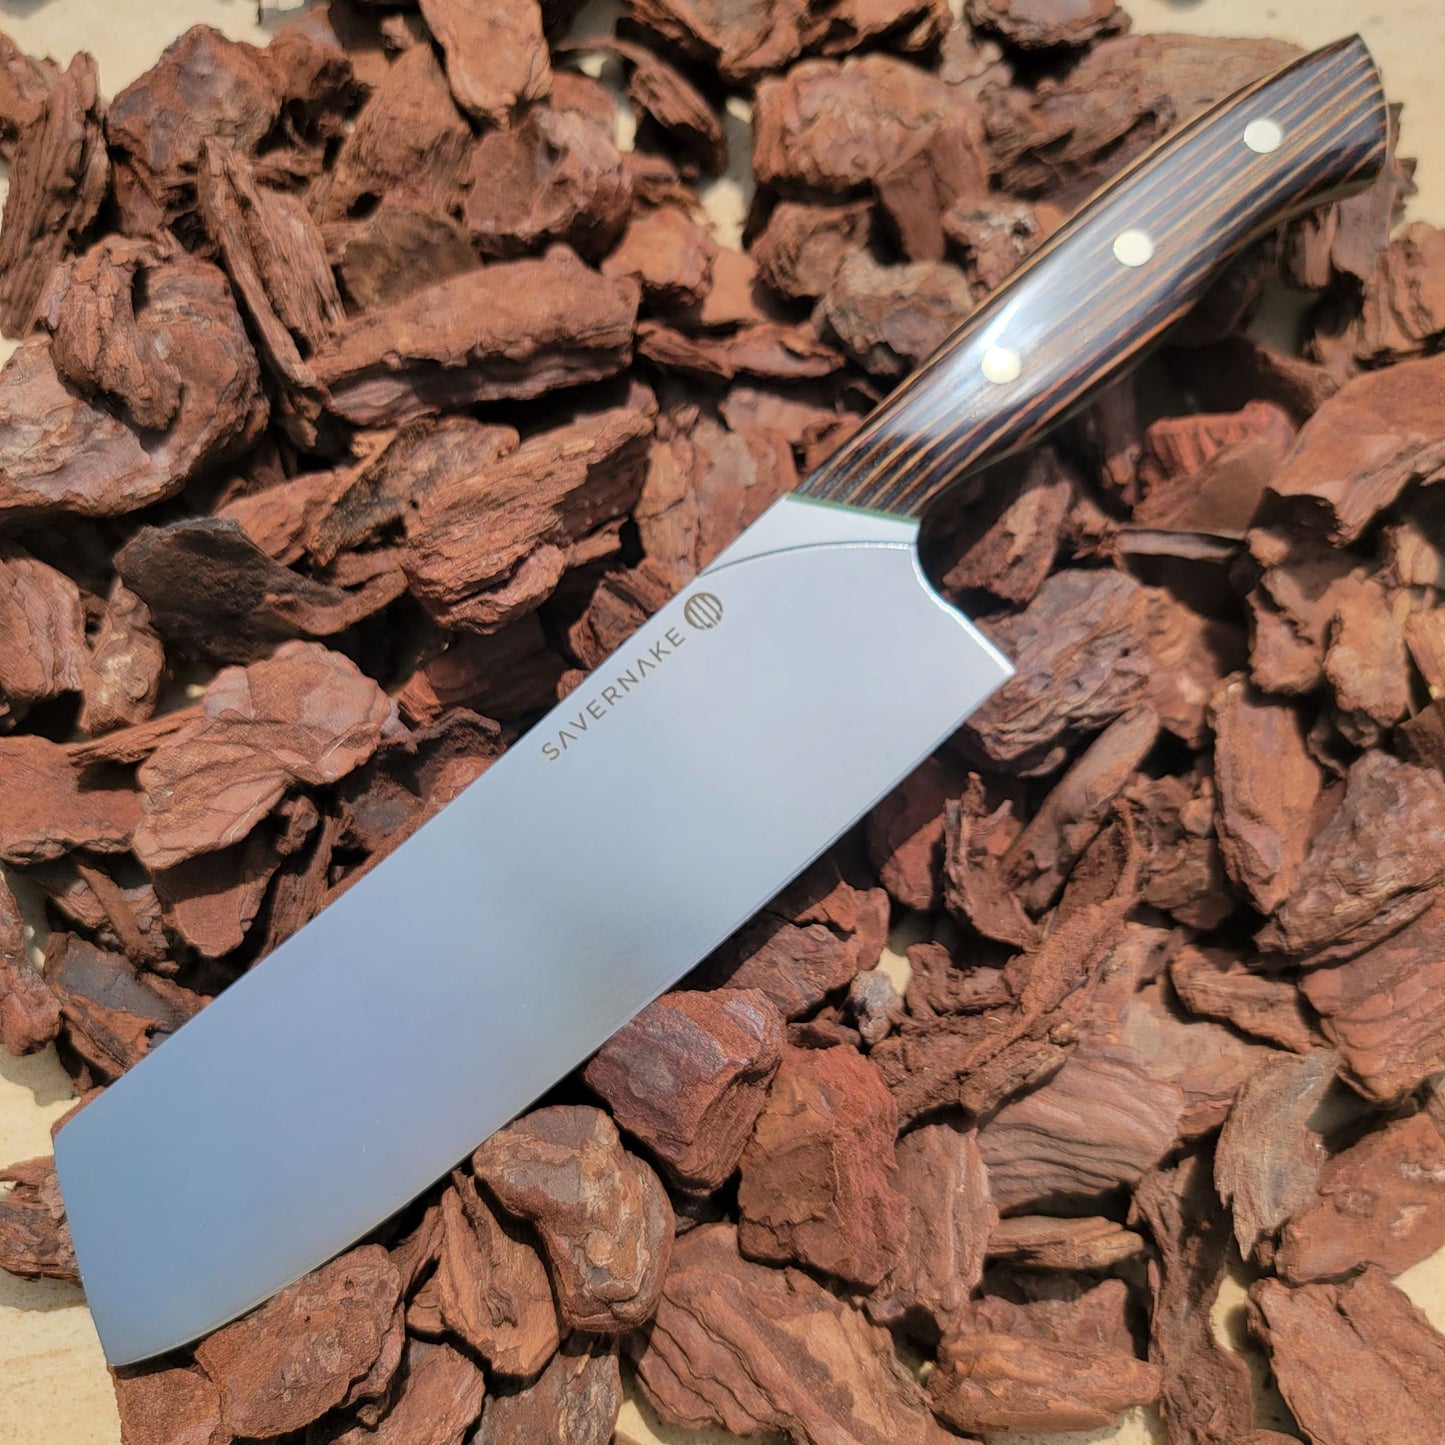 How to Make a Serbian Chef Cleaver - Brown County Forge